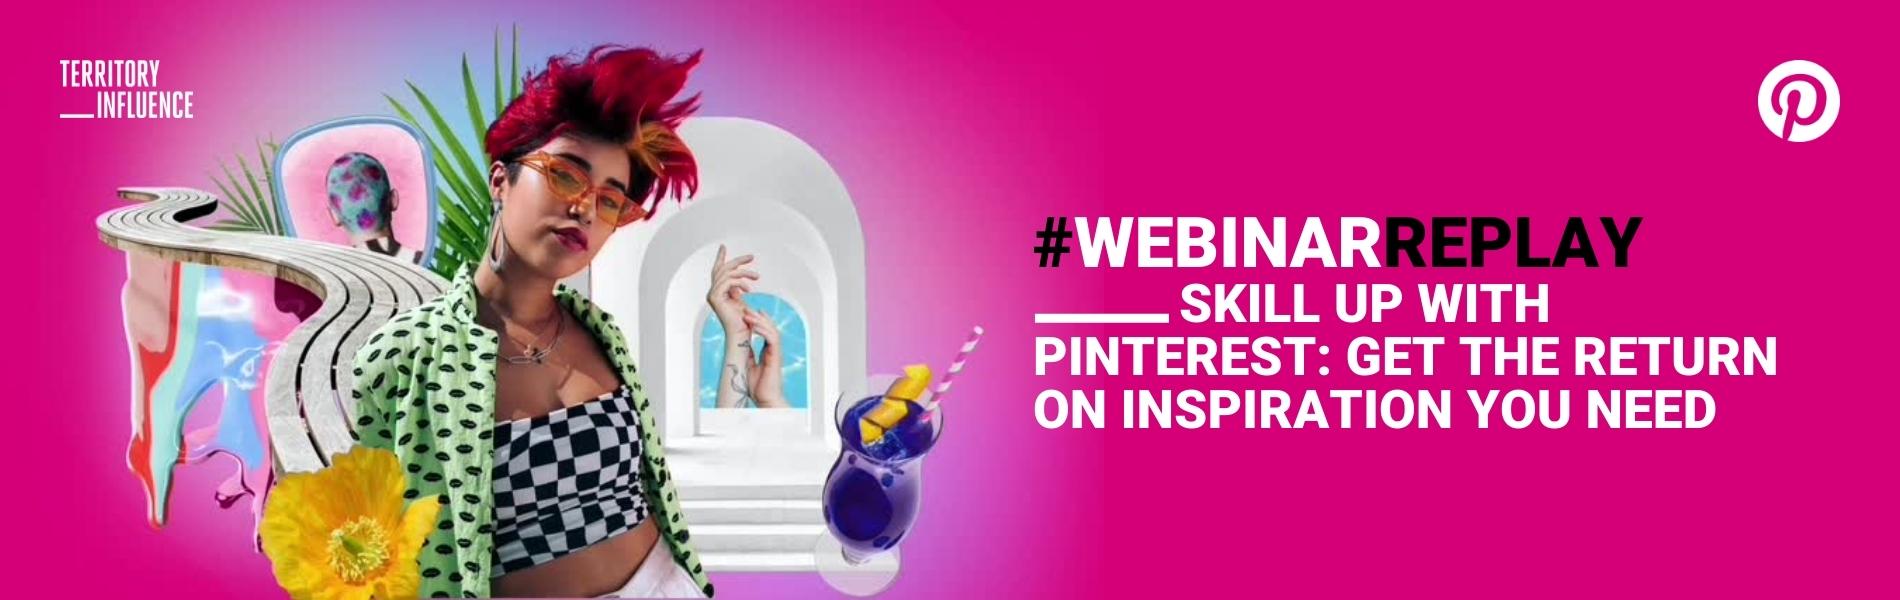 Download our last webinar with Pinterest